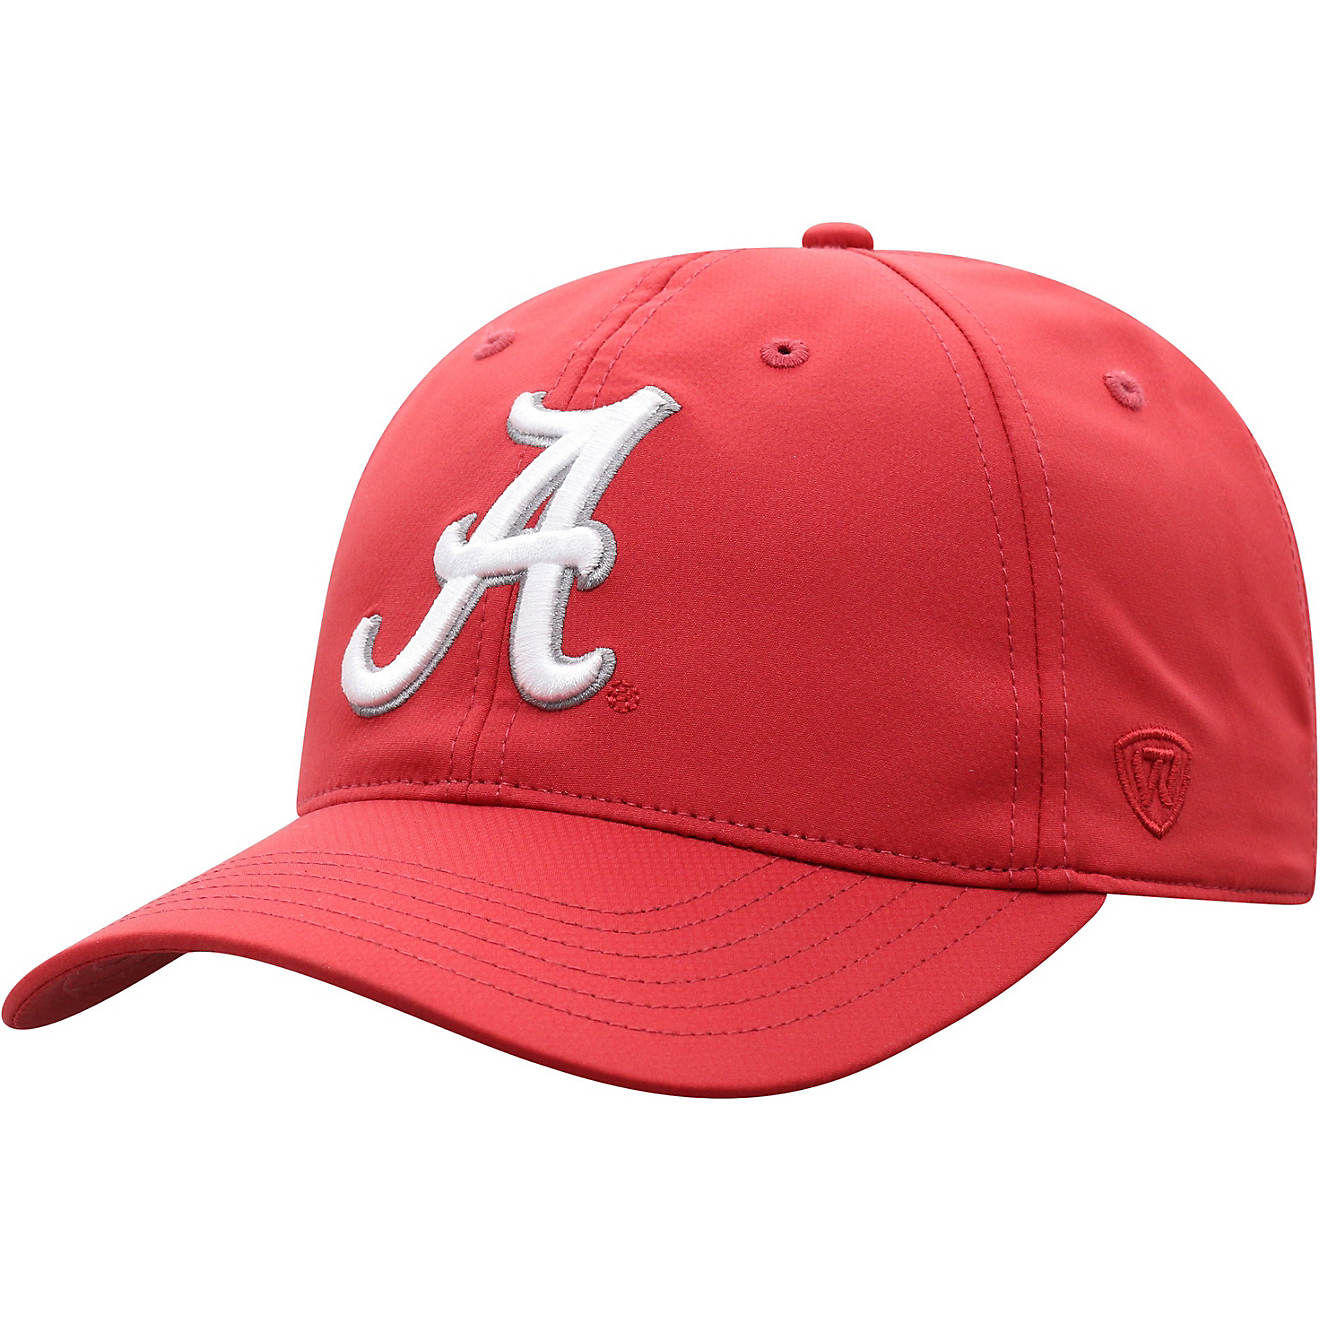 Top of the World Adults' University of Alabama Trainer 2020 Adjustable Cap                                                       - view number 1